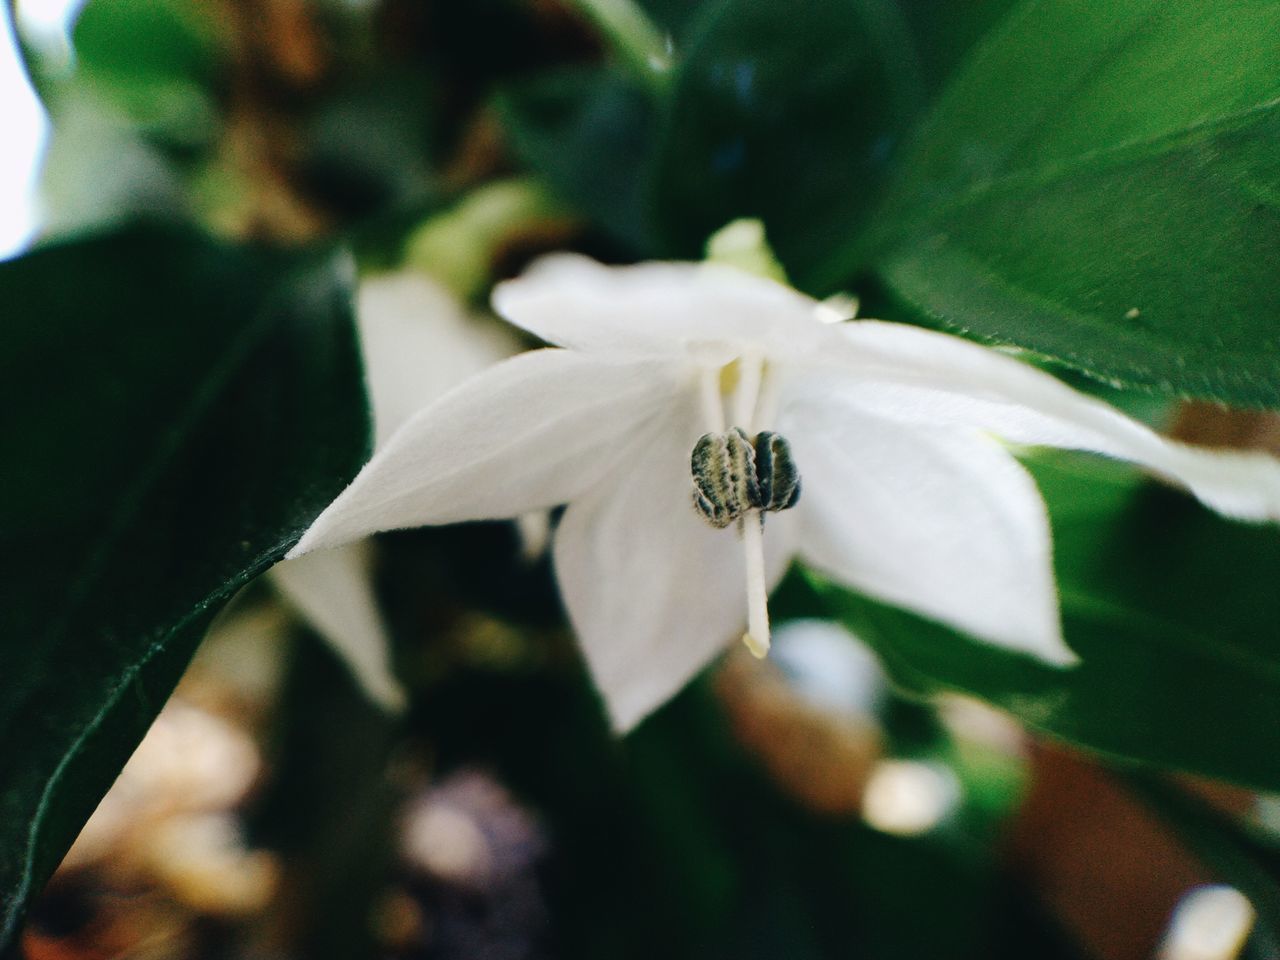 flowering plant, plant, flower, growth, vulnerability, fragility, beauty in nature, petal, freshness, close-up, invertebrate, plant part, leaf, flower head, insect, white color, no people, nature, animals in the wild, inflorescence, pollen, outdoors, pollination